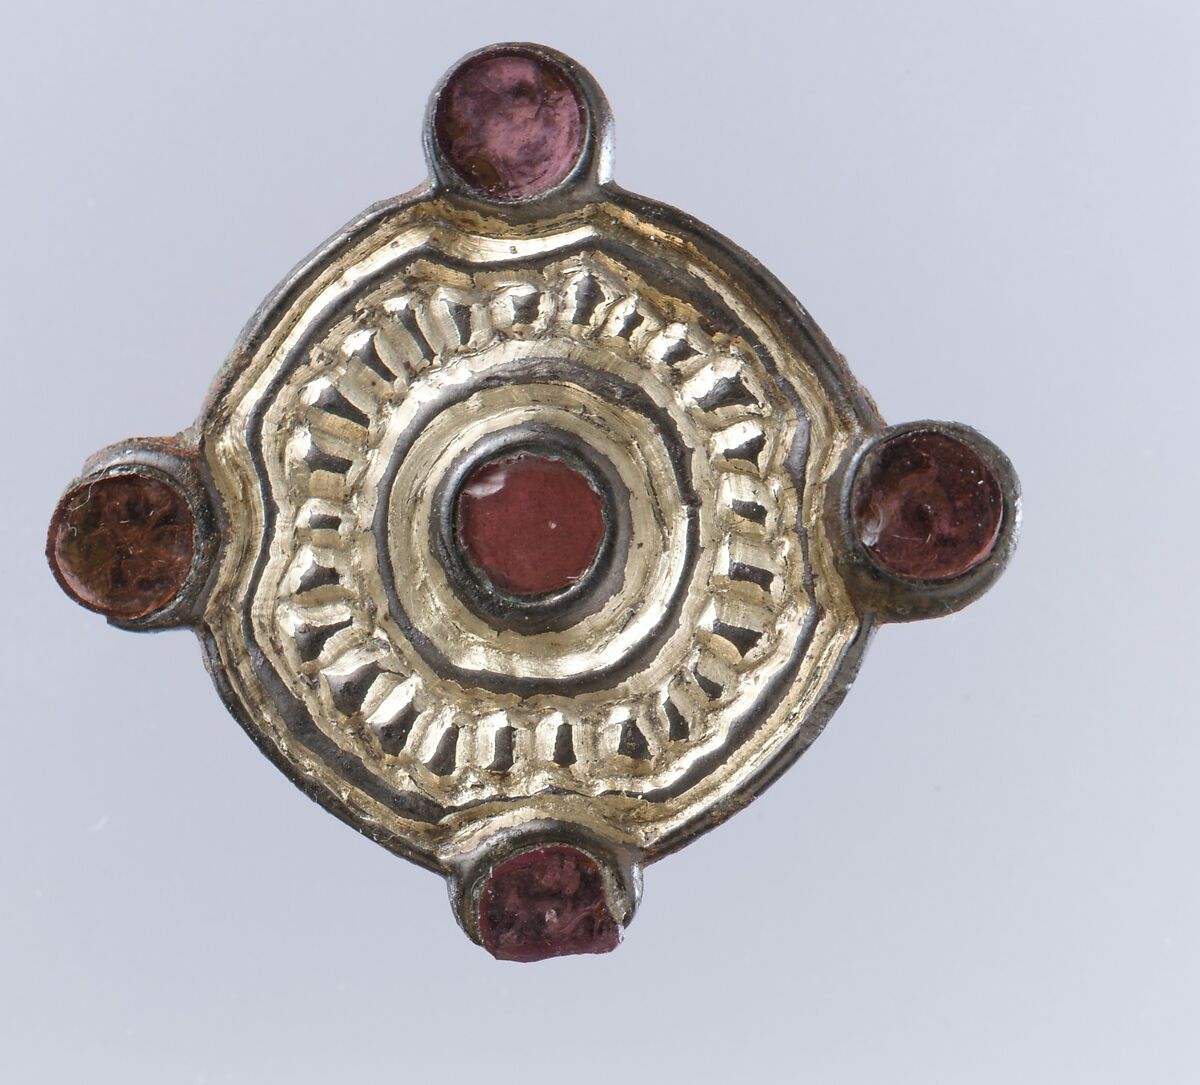 Whorl-Shaped Brooch, Silver-gilt, glass paste, remnant of iron pin, Frankish 